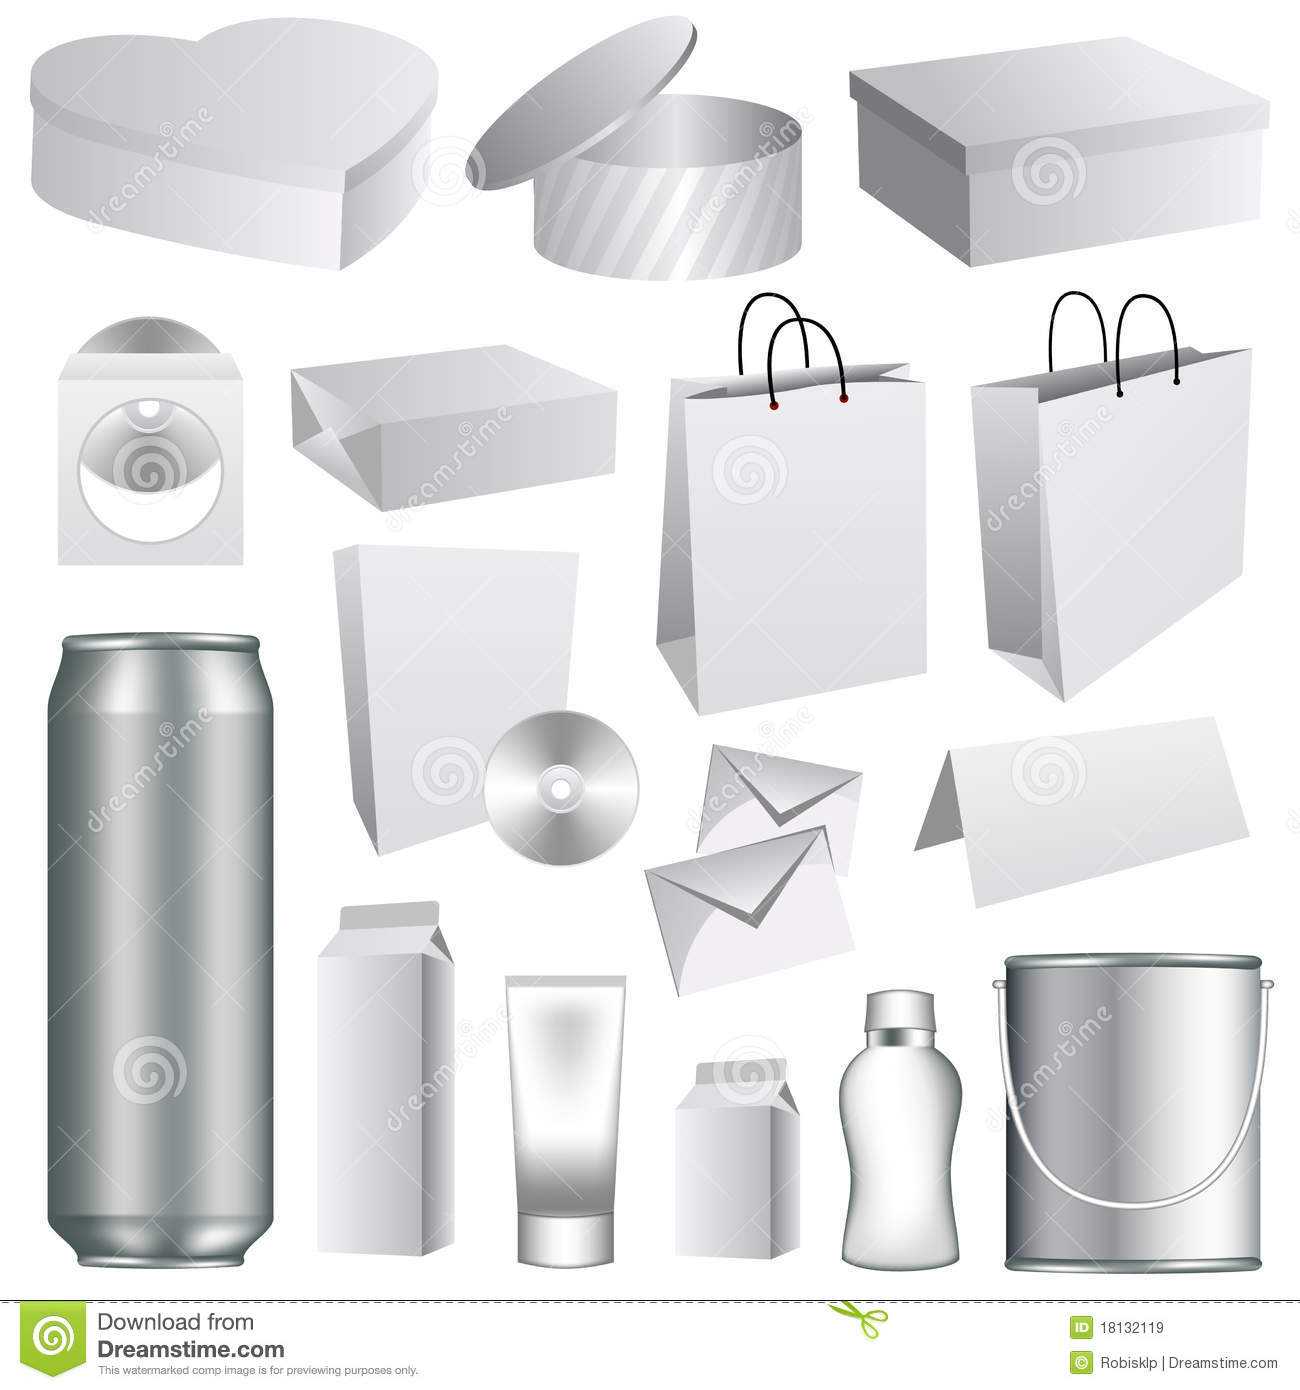 Blank Packaging Templates Stock Vector. Illustration Of Throughout Blank Packaging Templates